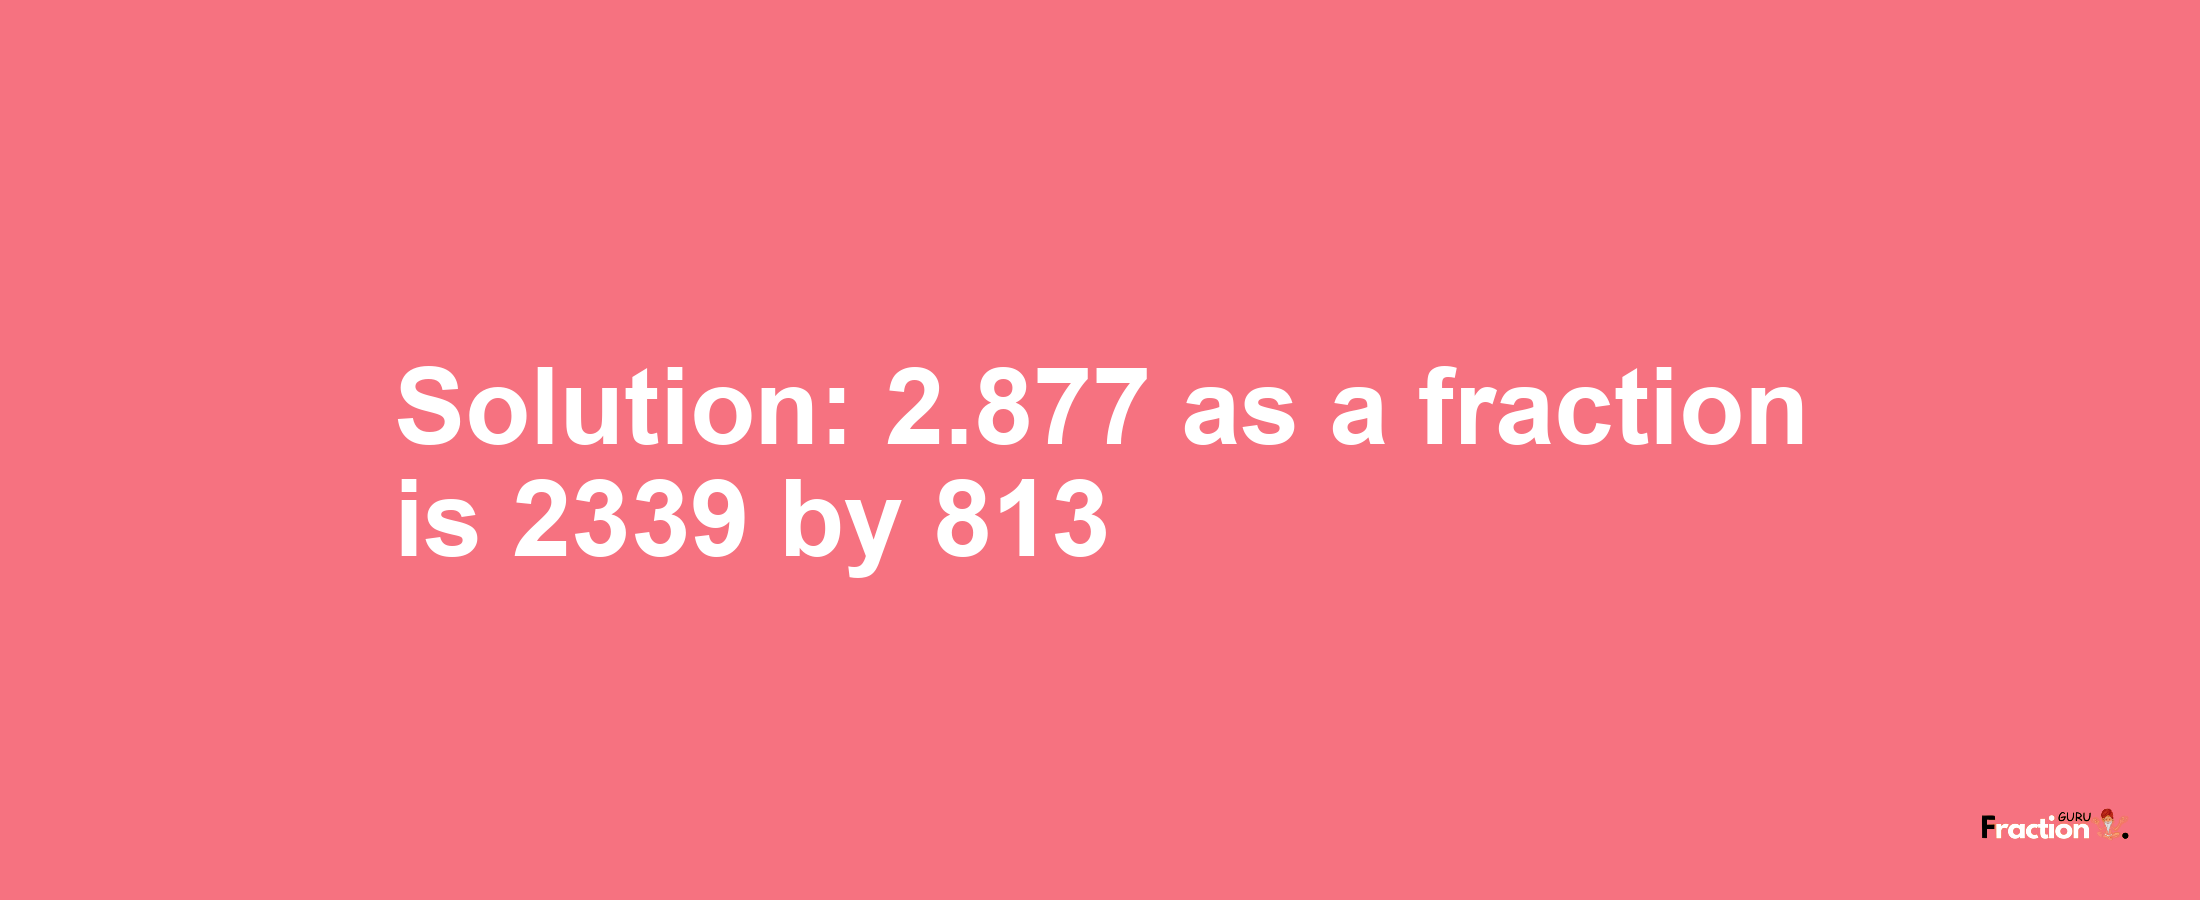 Solution:2.877 as a fraction is 2339/813